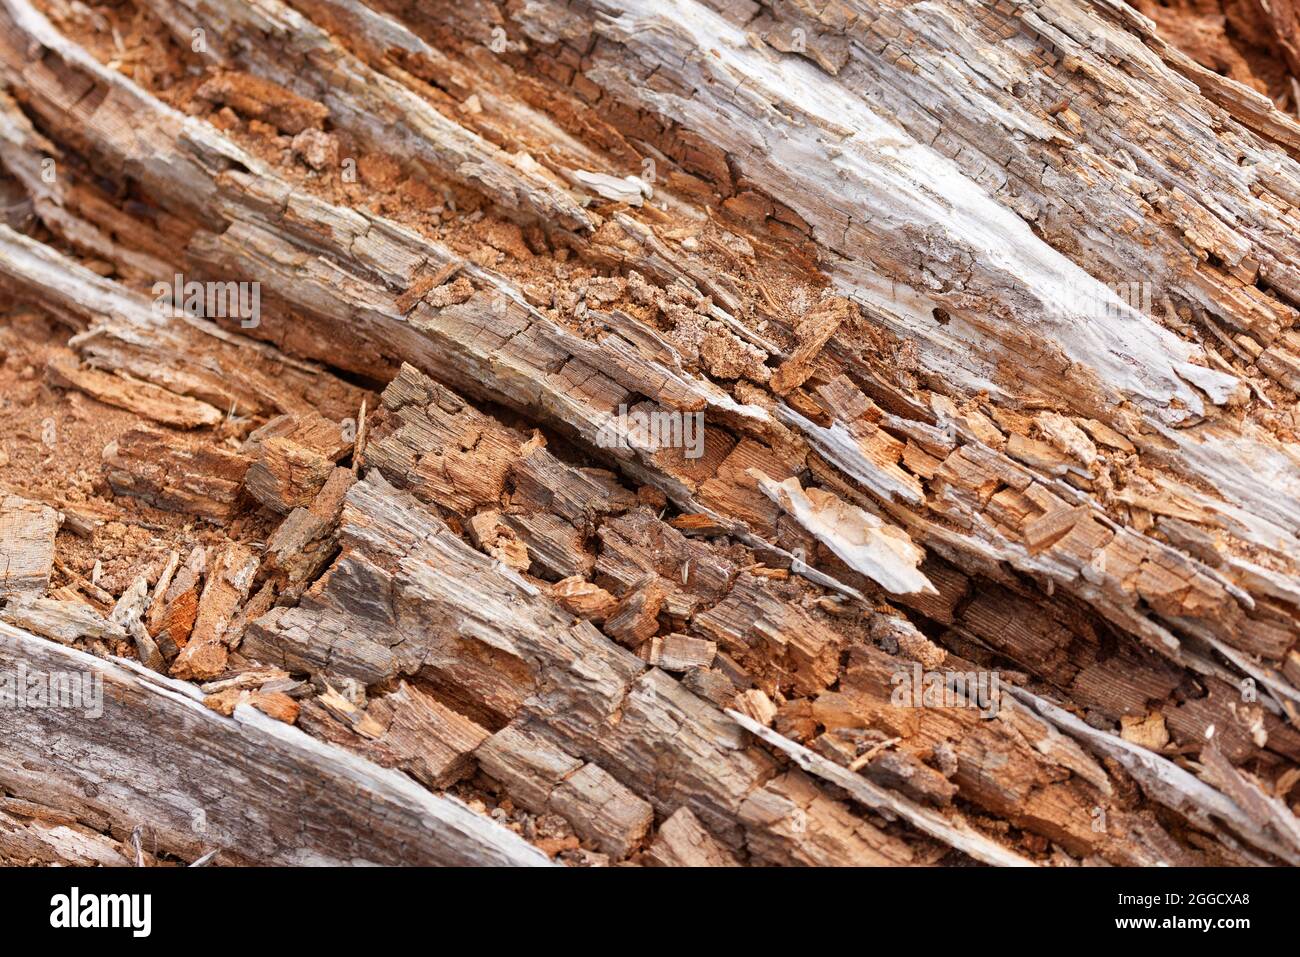 Brown Rotted Wood log for background use Stock Photo